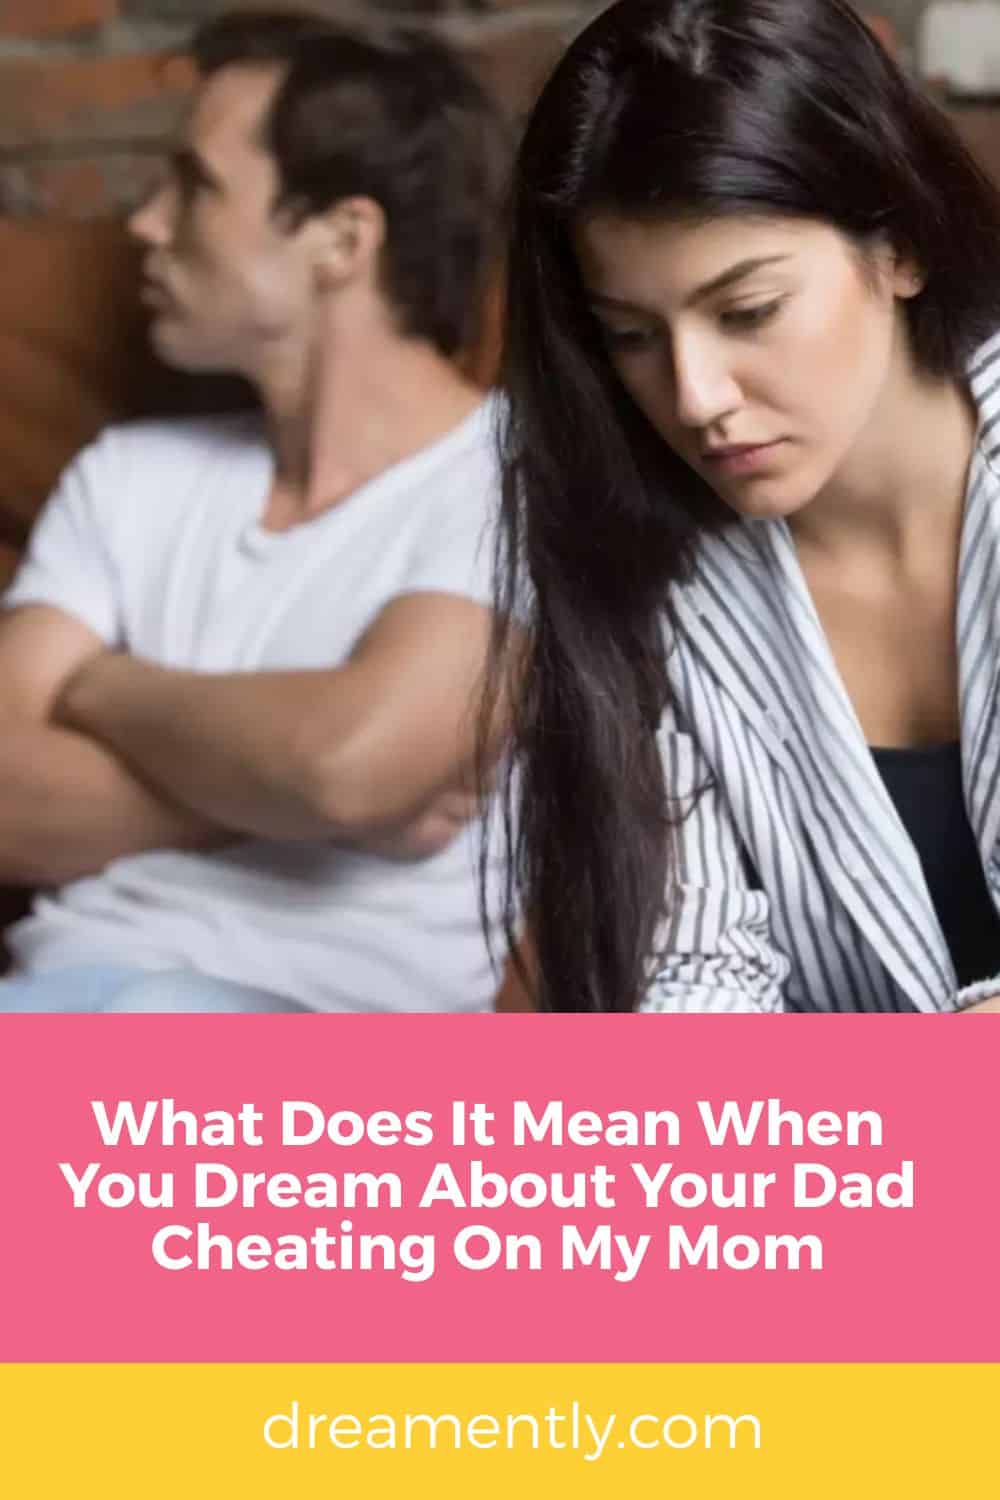 What Does It Mean When You Dream About Your Dad Cheating On My Mom